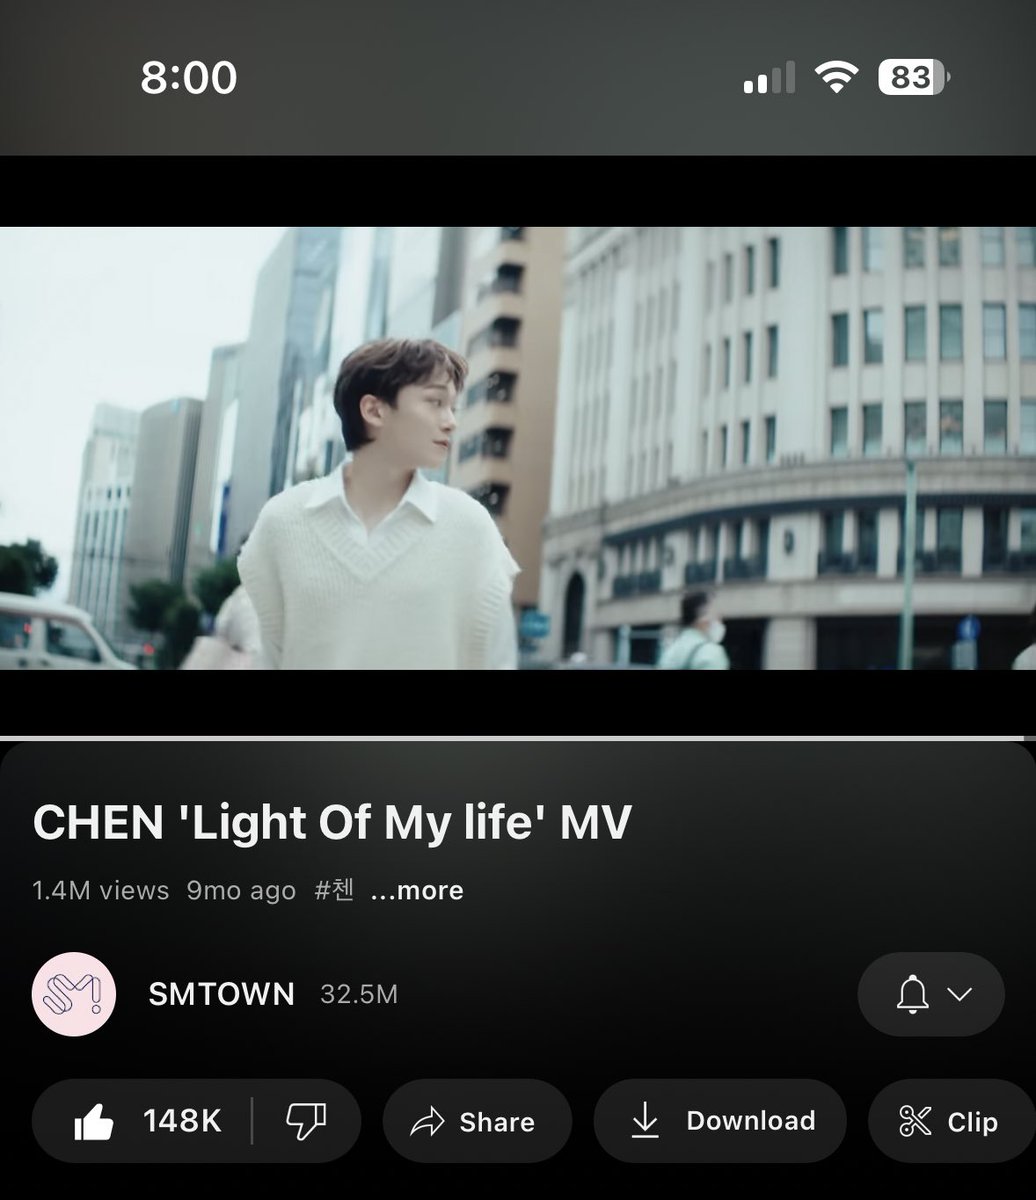 Let's do ‘Light Of My life’ streaming party challenge until the ‘DOOR’ album release!  

🔗youtube.com/watch?v=lZePEh…

tag moots:
@chenofmylife @thursddae @chenshines 
@loversicks @lalaloeys @winarakniyeol 

anyone can join this challenge!  
#LightOfMyLife 
#LOML_StreamingParty